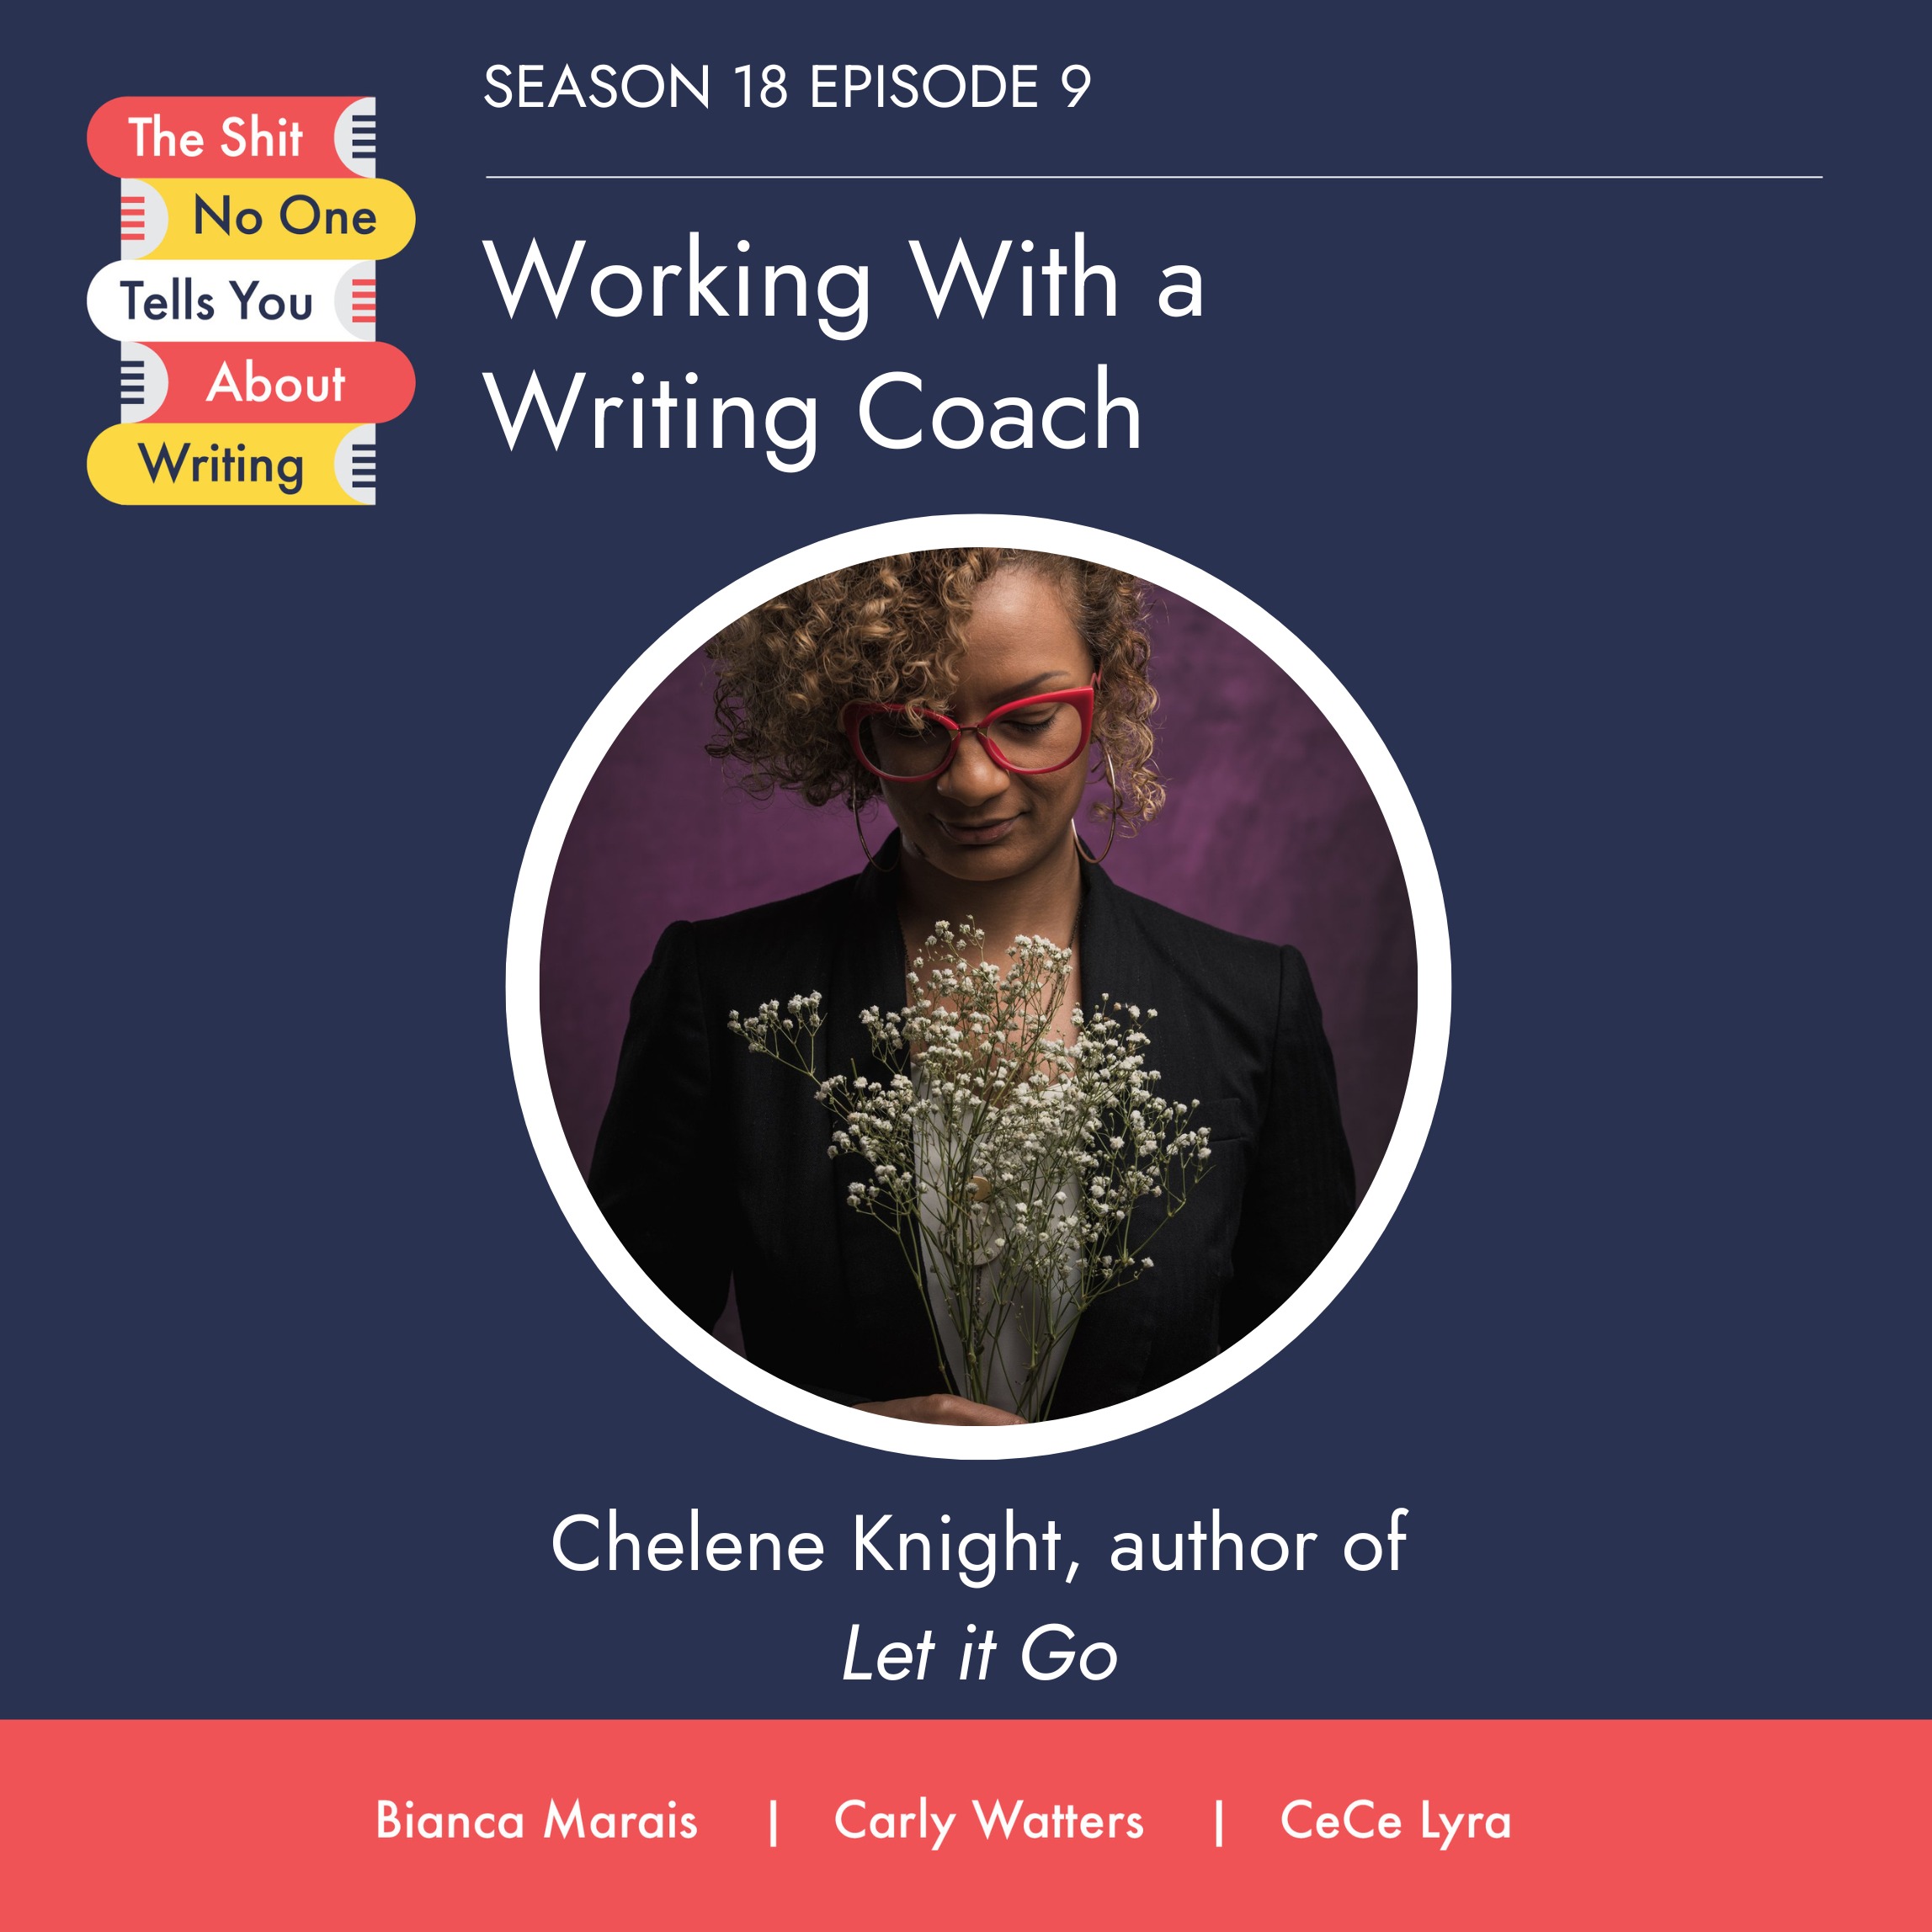 Working with a Writing Coach